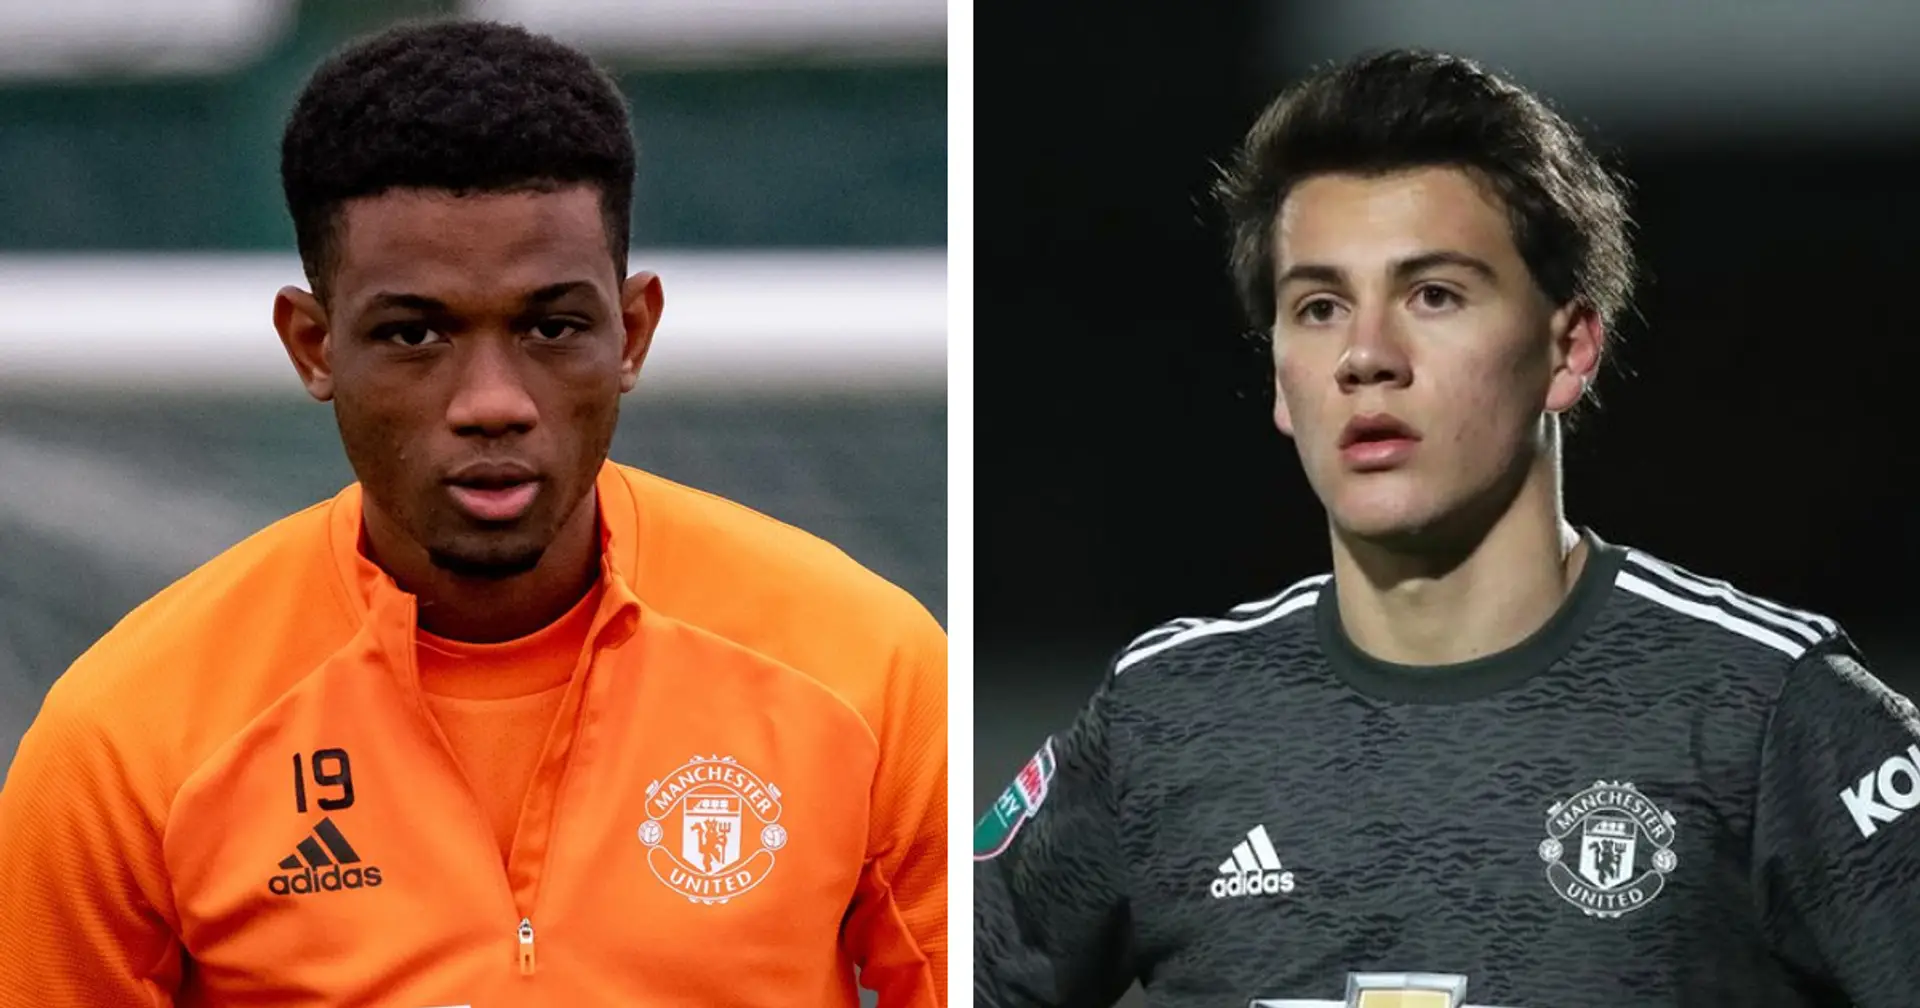 Man United reportedly have different plans for Amad Diallo and Facundo Pellistri in 2021/22 (reliability: 4 stars)